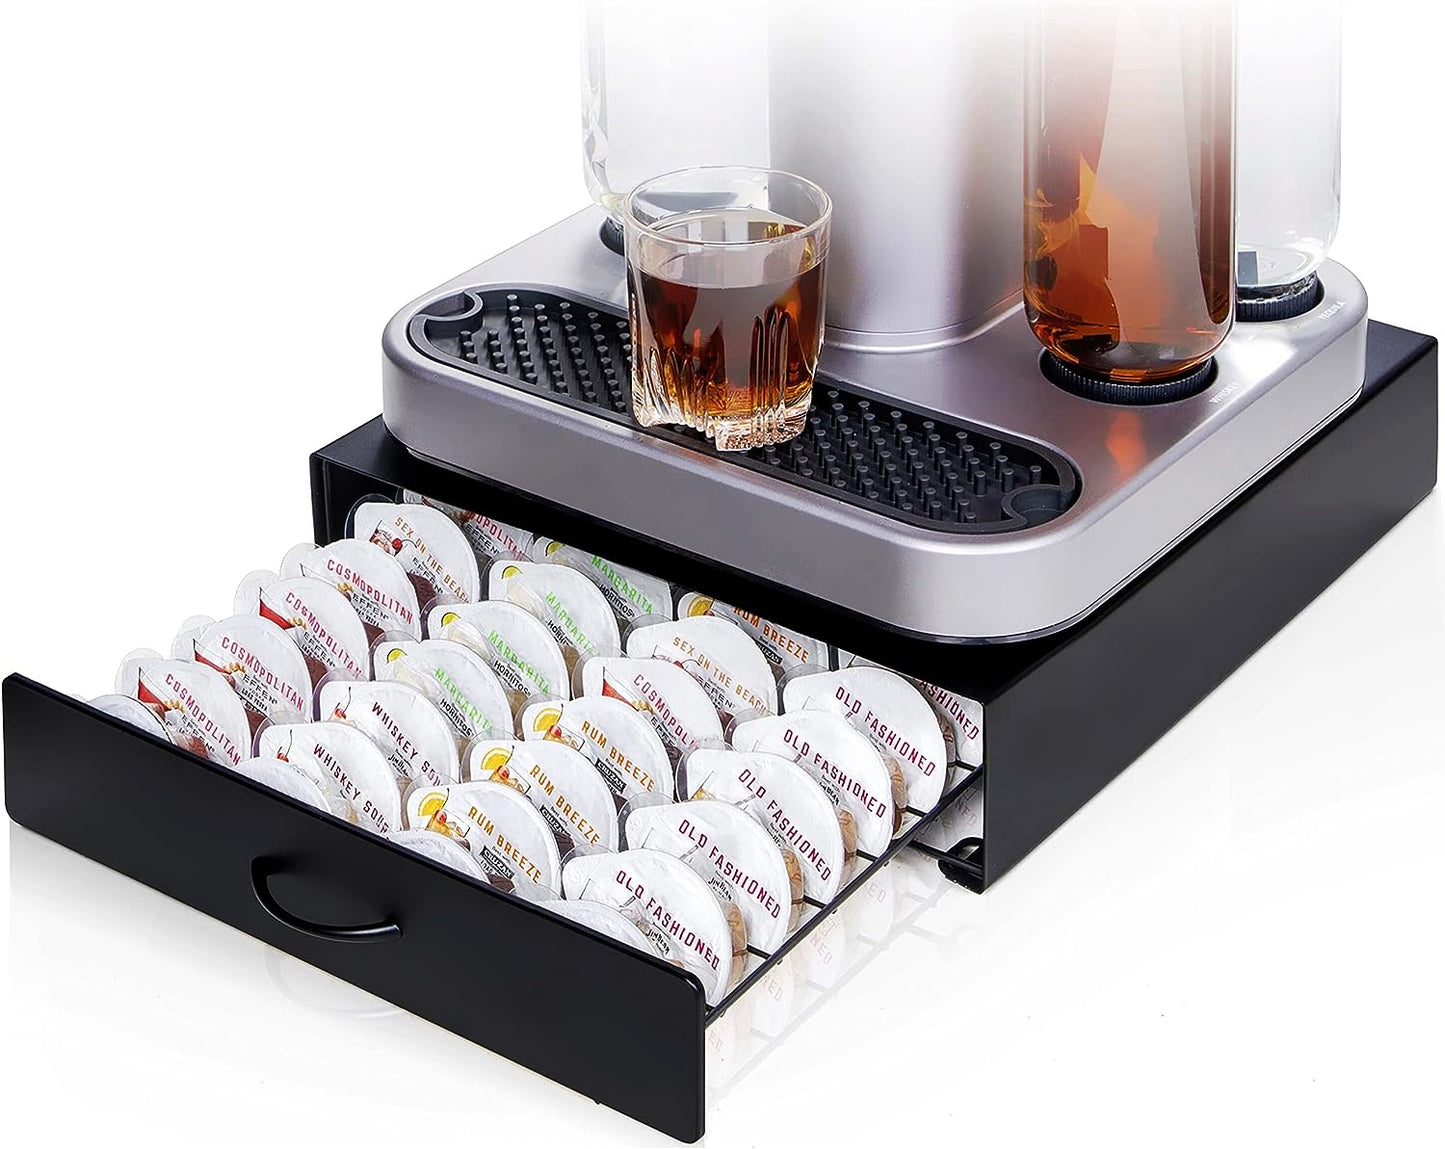 Premium Storage Drawer for Bartesian Capsules by  - Holds up to 40 Bartesian Pods - Sturdy and Stackable Bartesian Pod Holder - Bartesian - Bartesian Machine